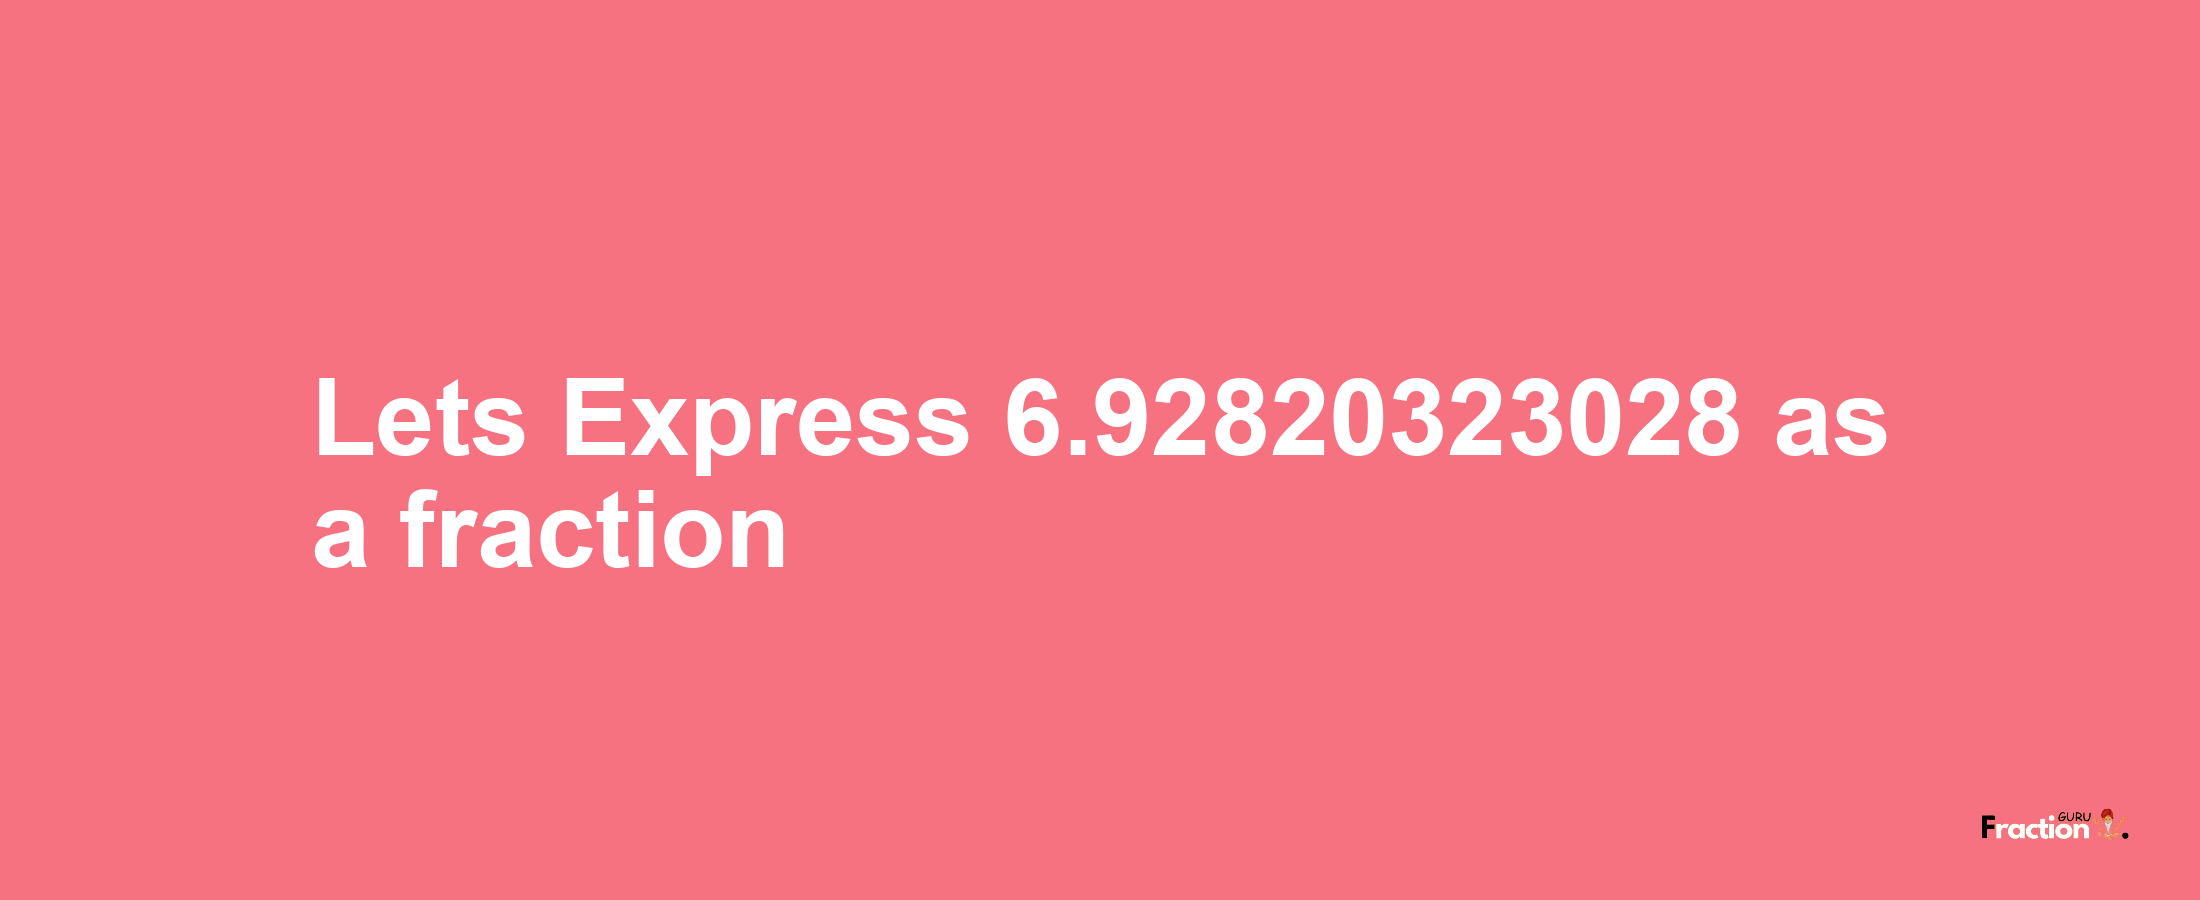 Lets Express 6.92820323028 as afraction